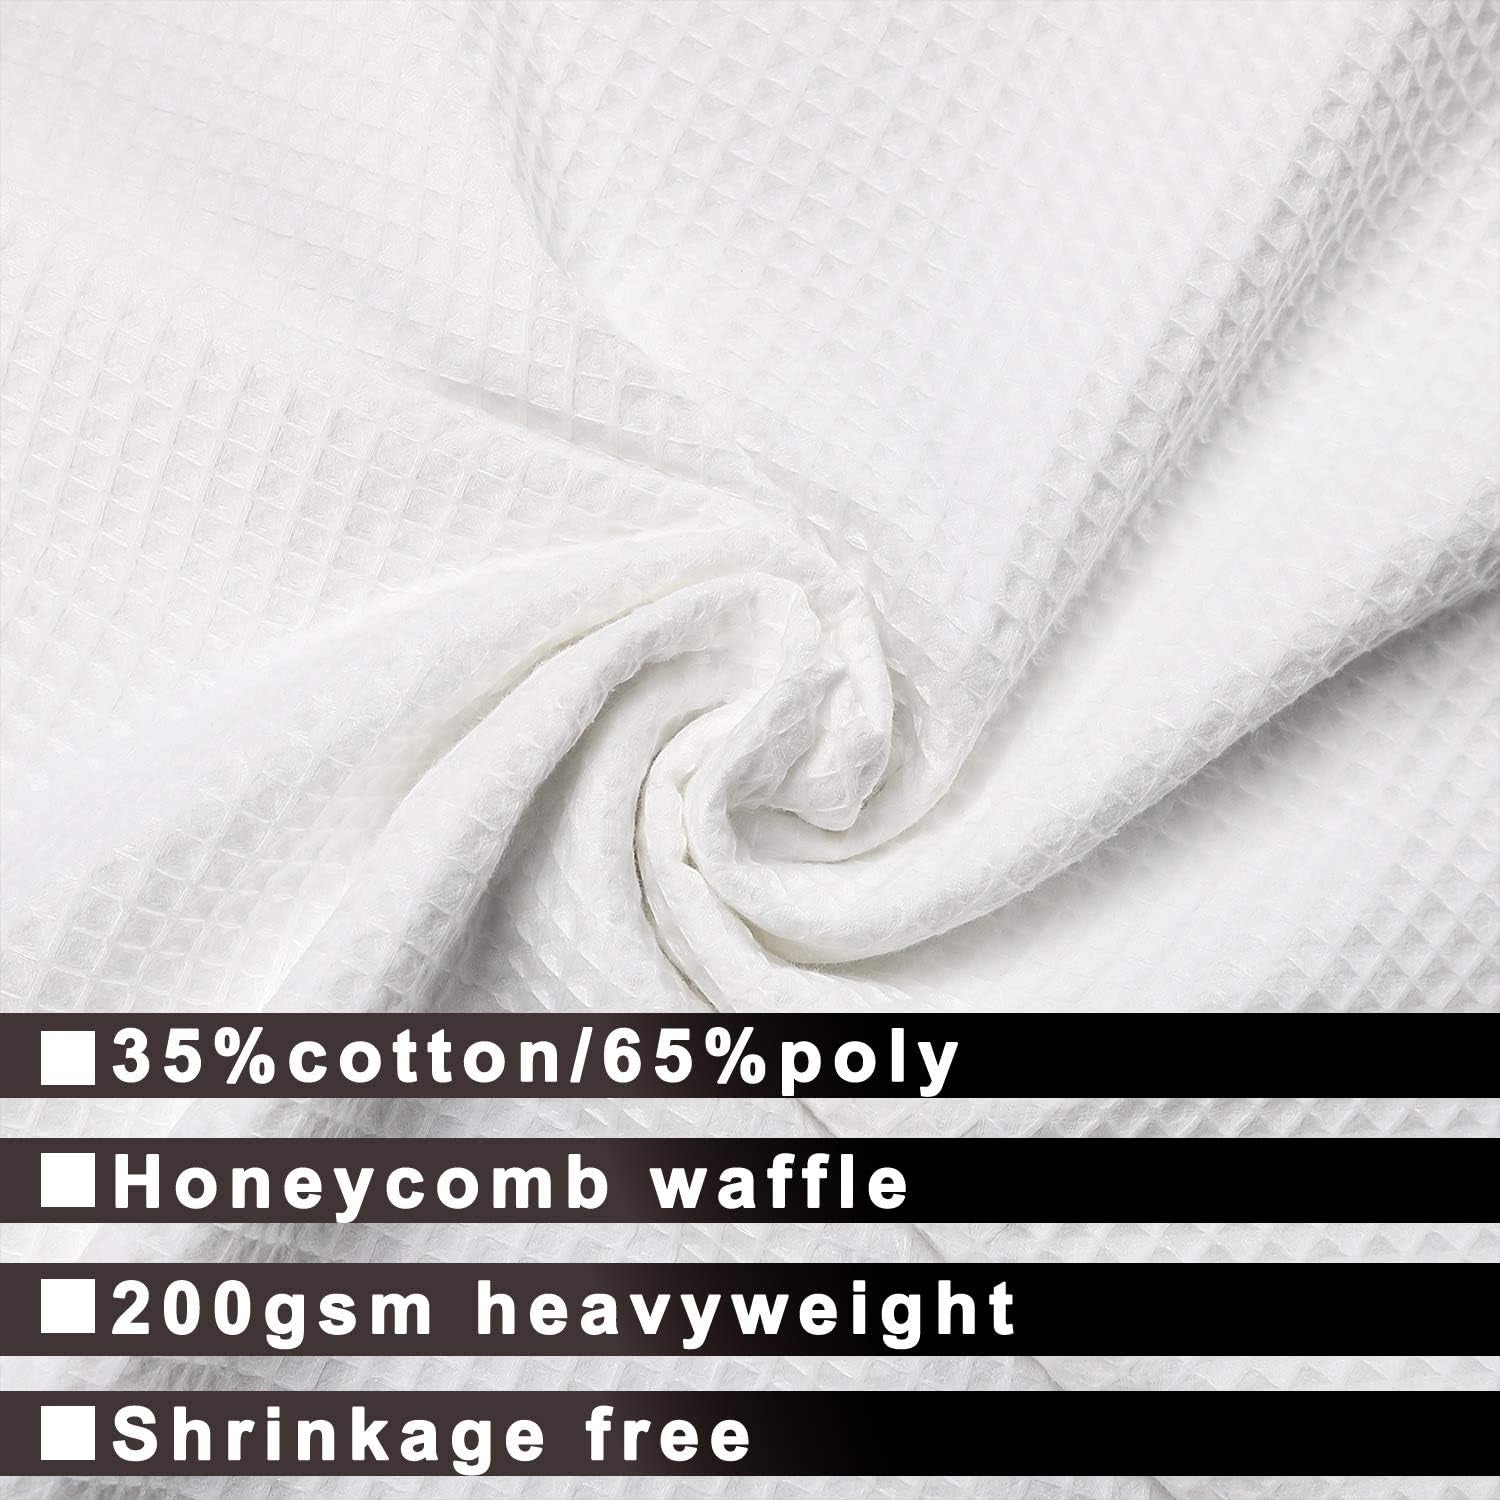 Hotel Style Cotton Shower Curtain with Snap-In Fabric Liner, Mesh Window Top, Honeycomb Waffle Weave Cotton Blend Fabric, Washable, White, 72X72 Inches